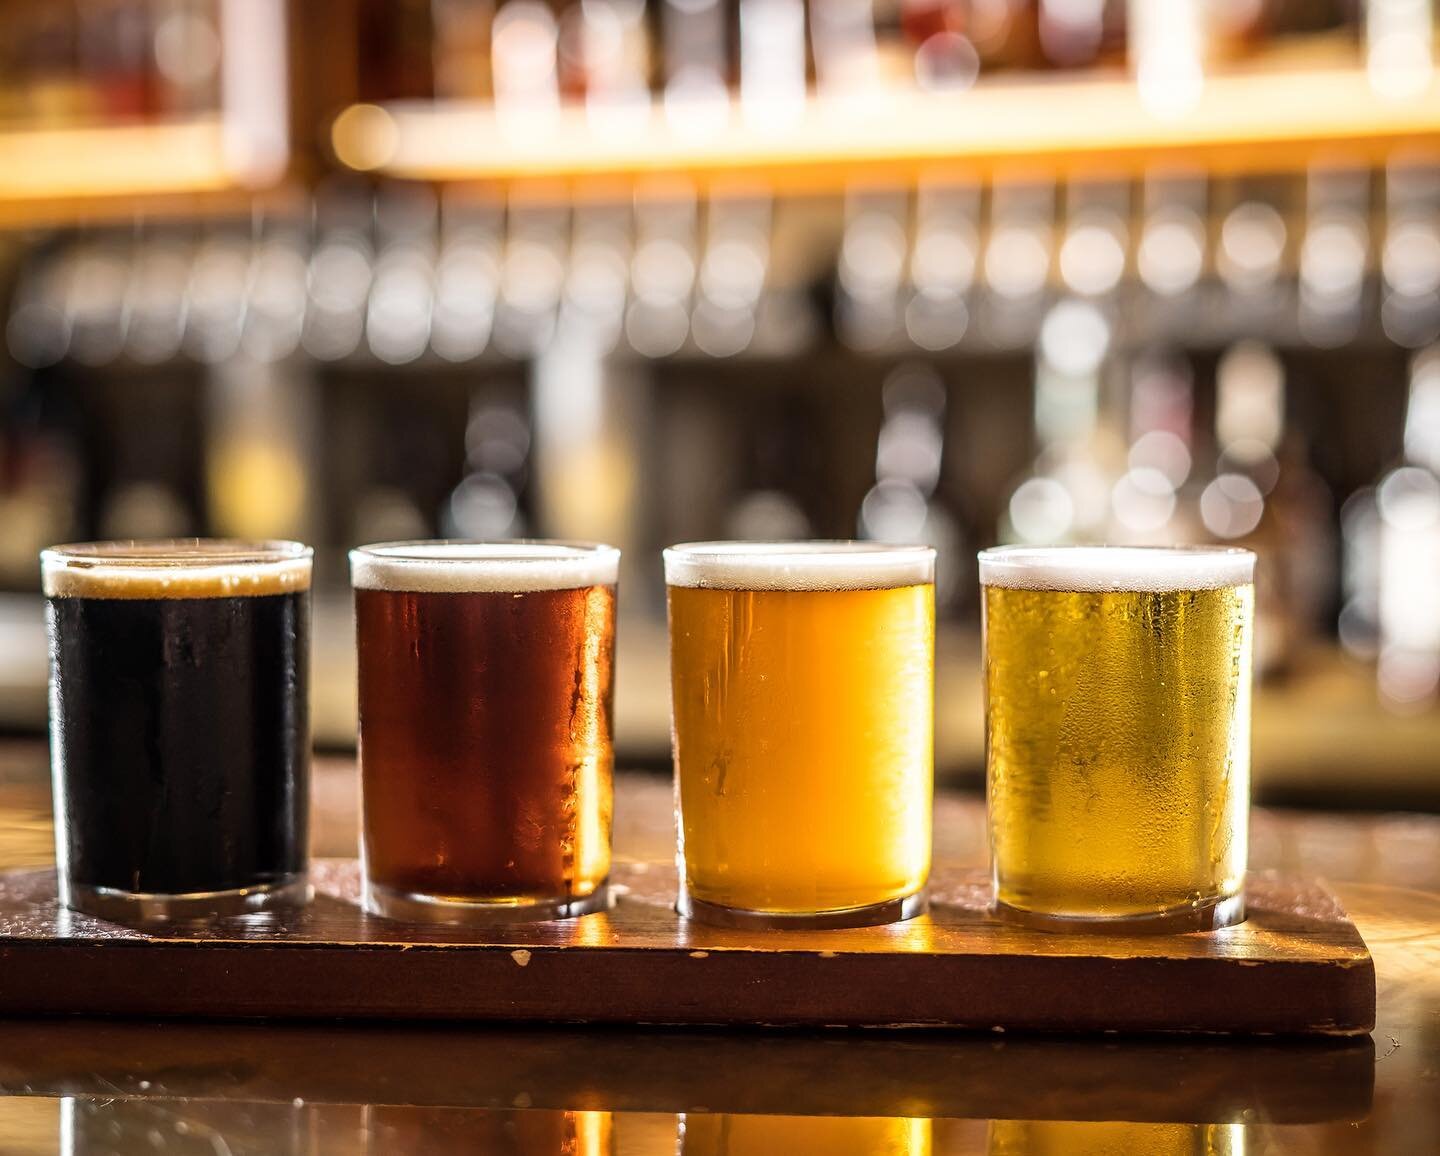 Take off with us and experience our epic flight of beers ✈️🍻 - the ultimate journey for any craft beer lover! With the largest selection of craft beer on tap in Connecticut &amp; 72 perlick taps - always fresh &amp; always cold 🍺❄️ 

#beer #craft #